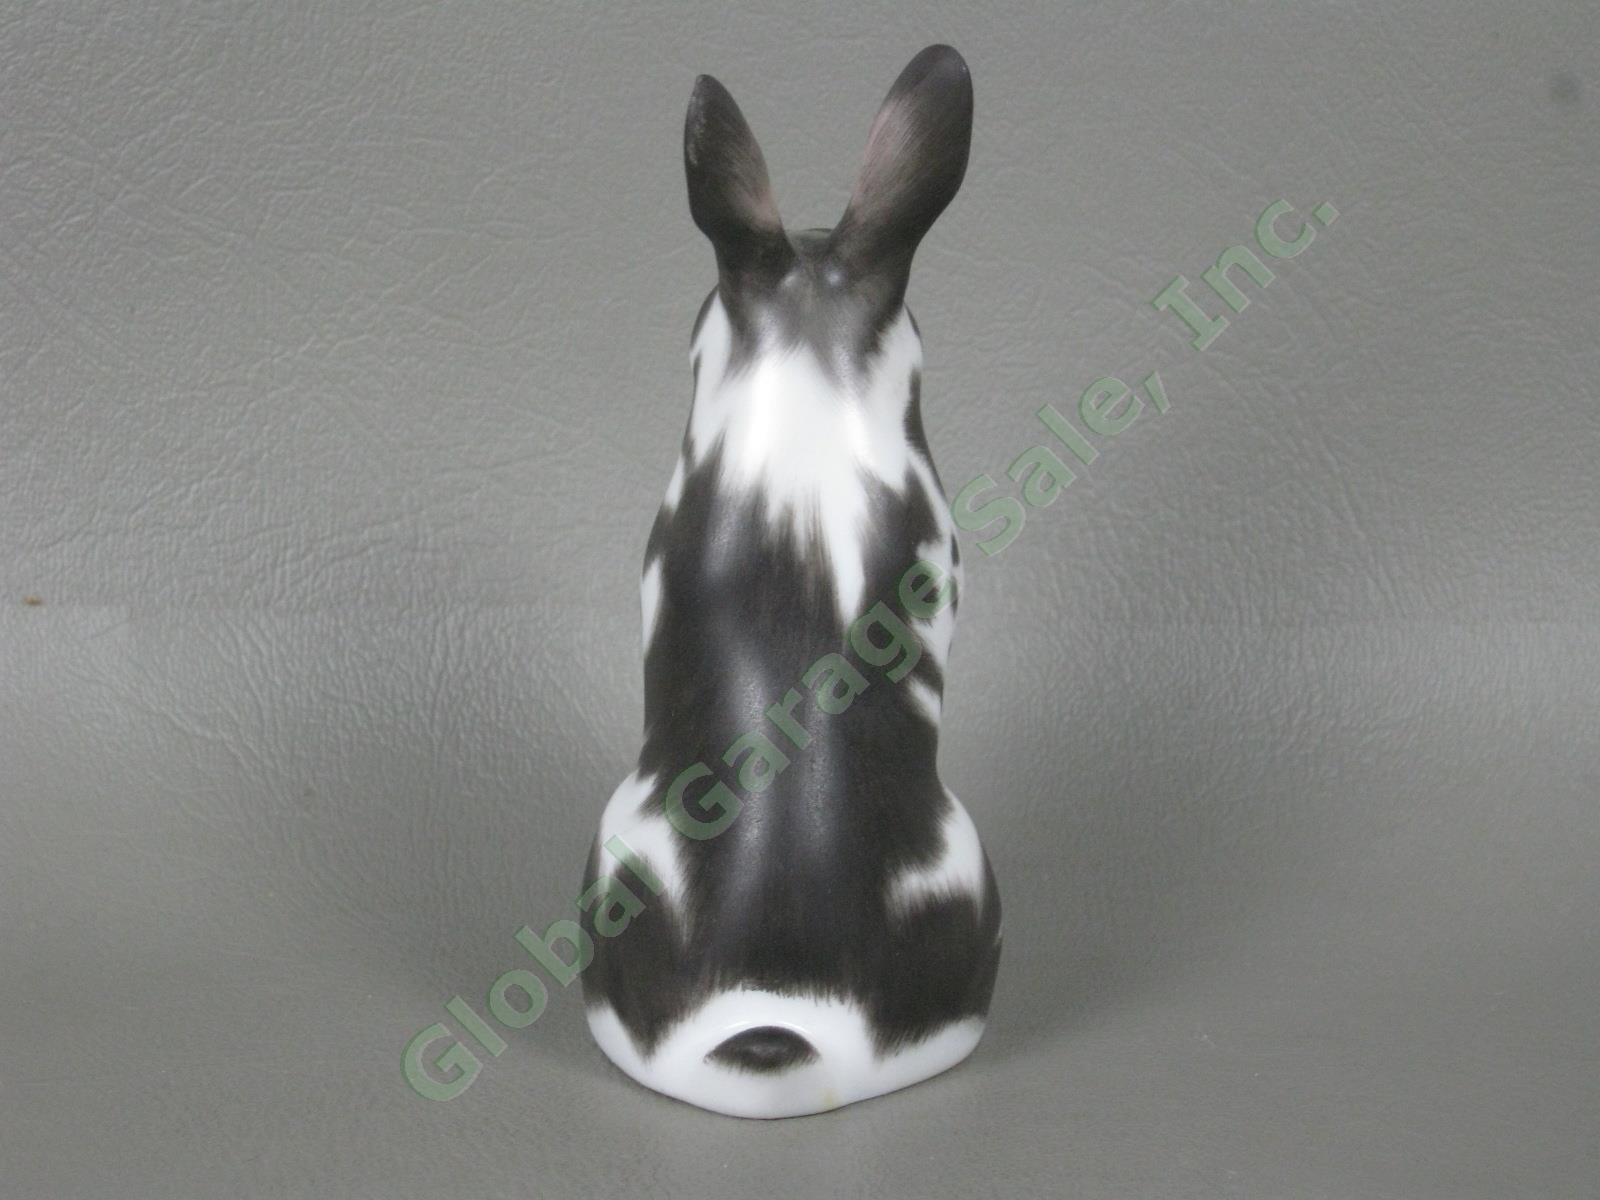 2005 Herend Black & White Porcelain 3.75" Bunny Rabbit With Carrot Figurine NR! 3